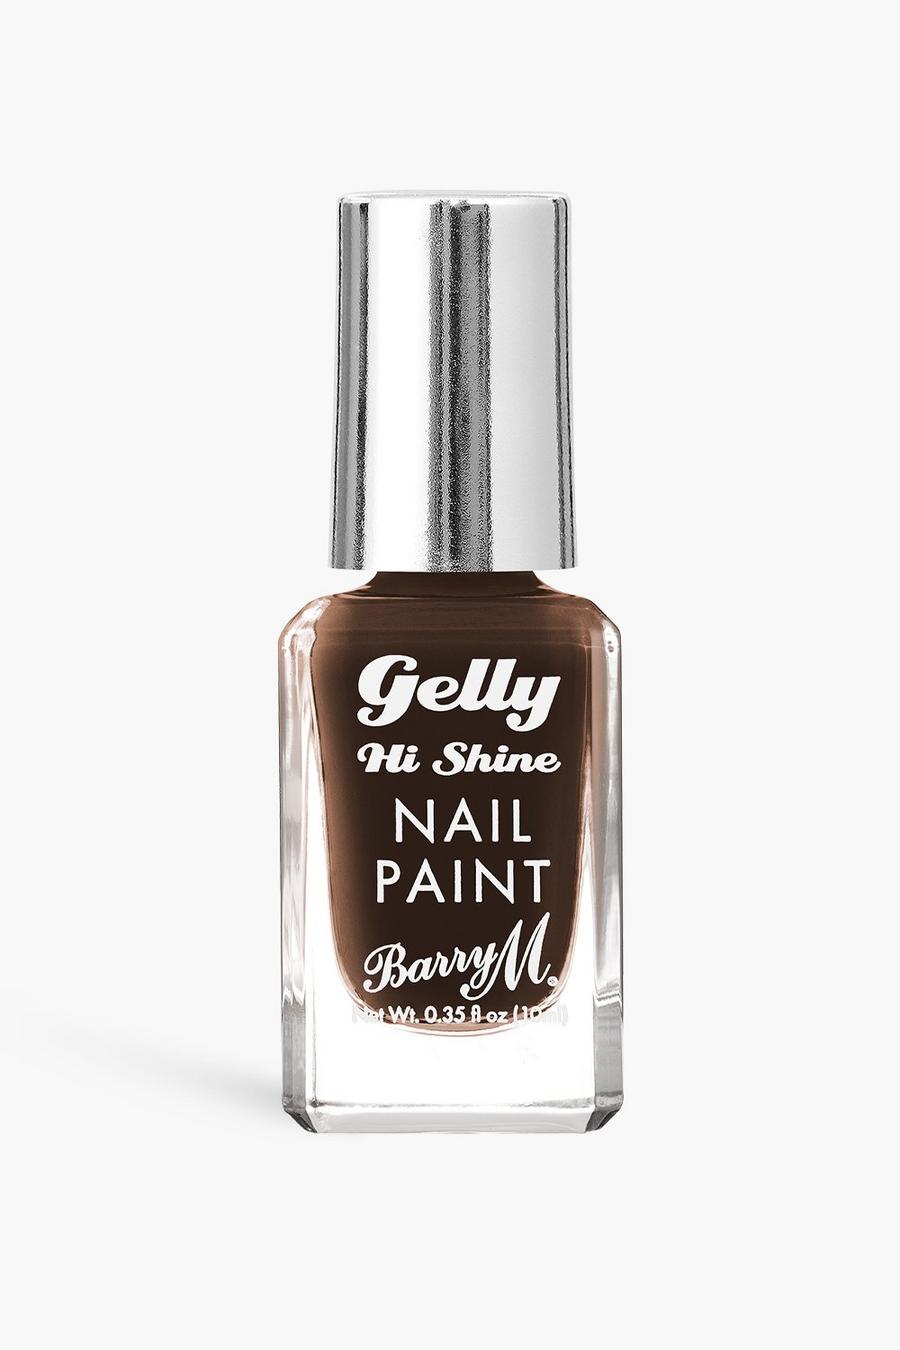 Barry M Gelly Nail Paint - Espresso